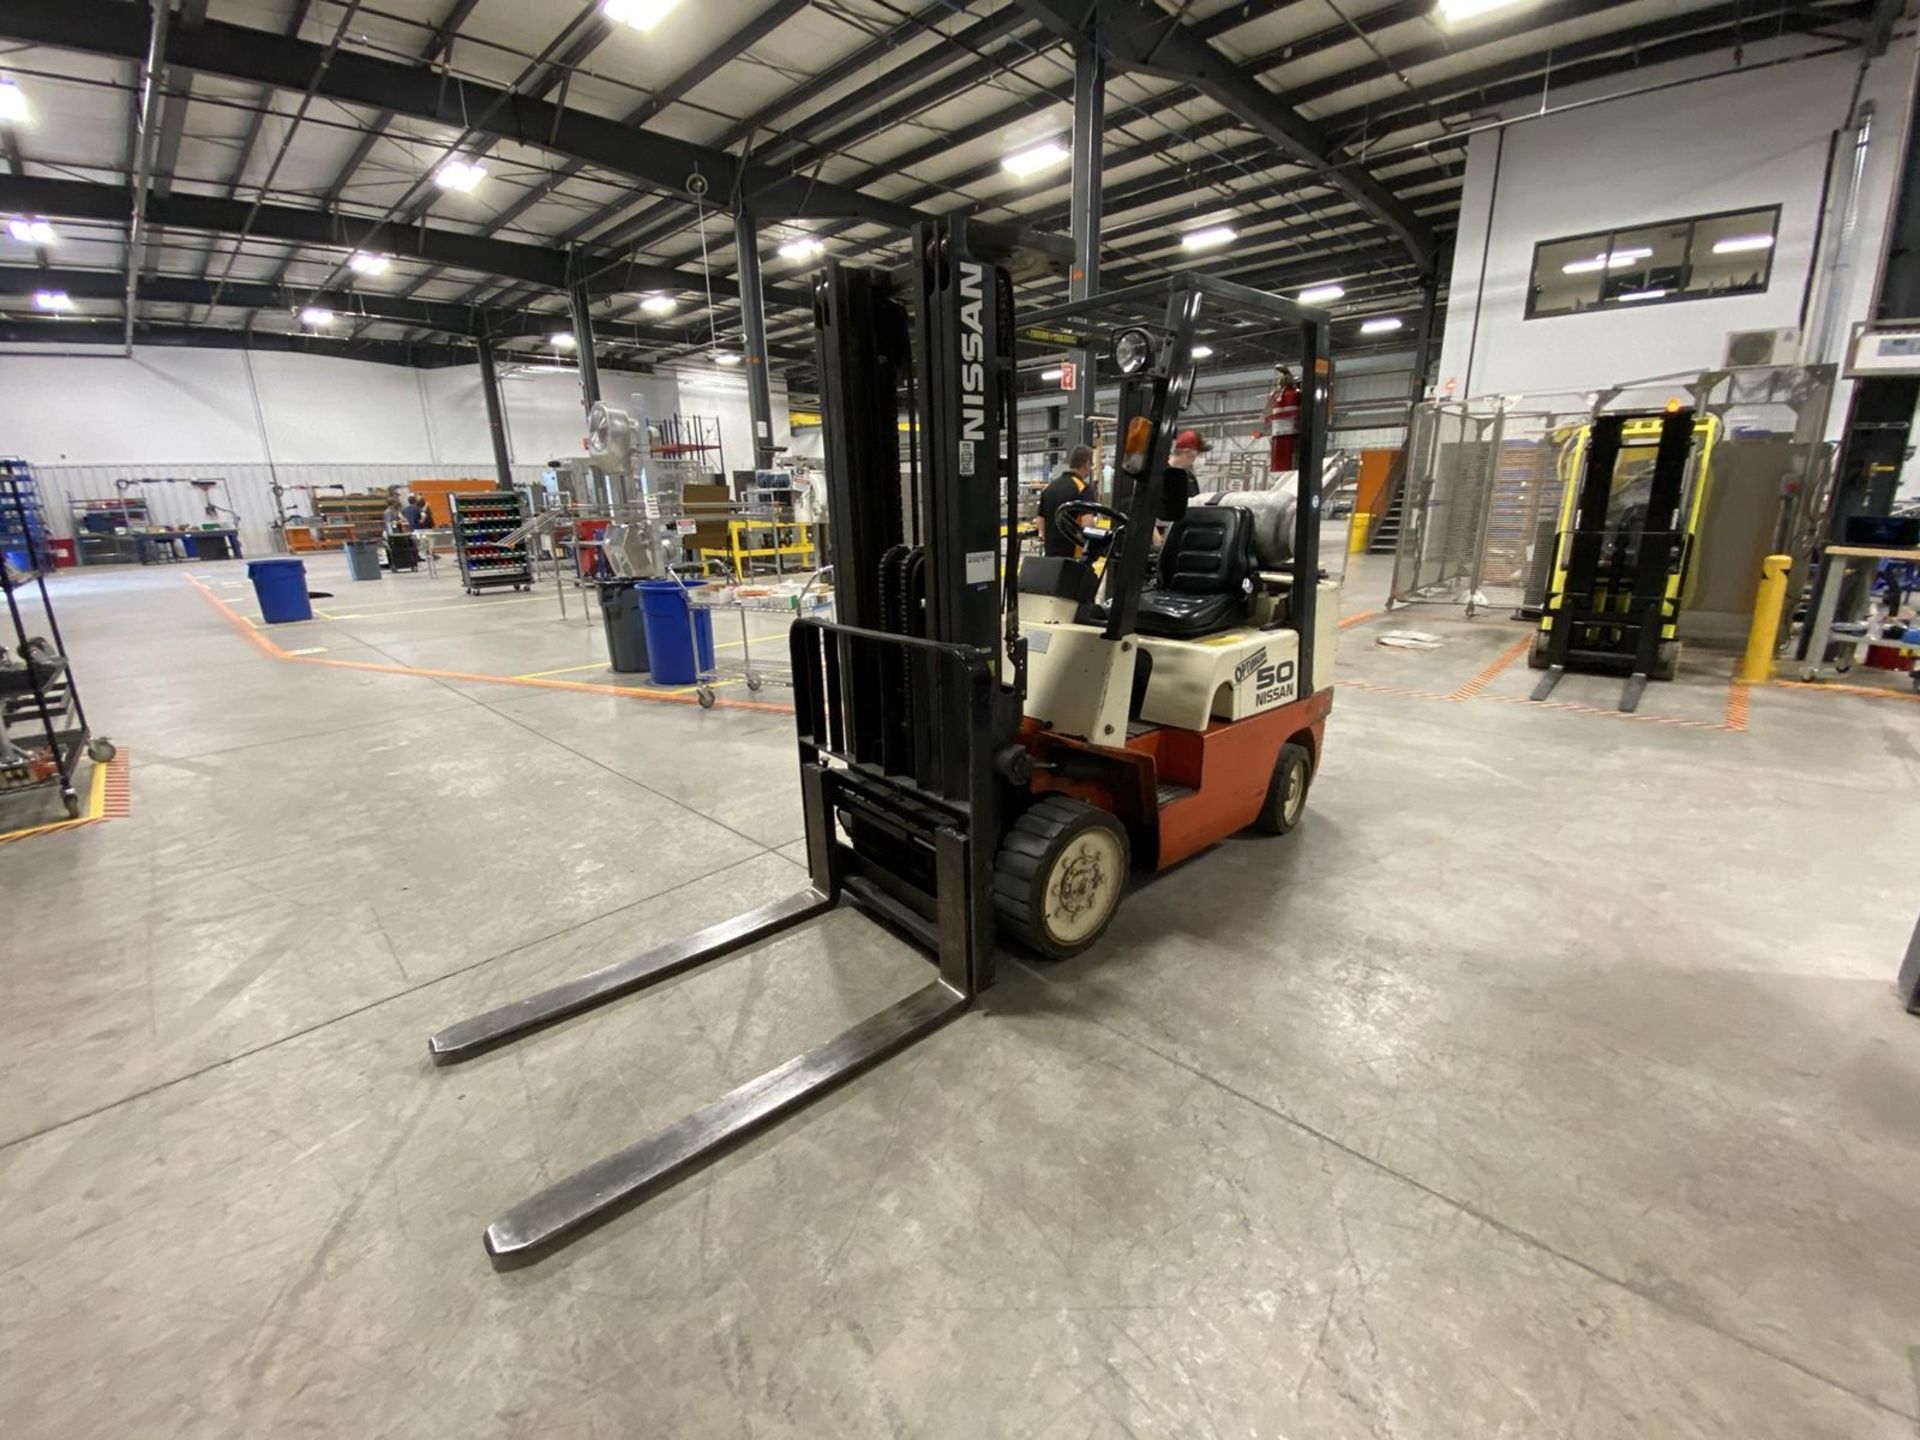 NISSAN, CPJ02A25PV, 4400 LBS, 3 STAGE, LPG FORKLIFT WITH SIDE SHIFT, 187" MAXIMUM LIFT, S/N CPJ02- - Image 3 of 8